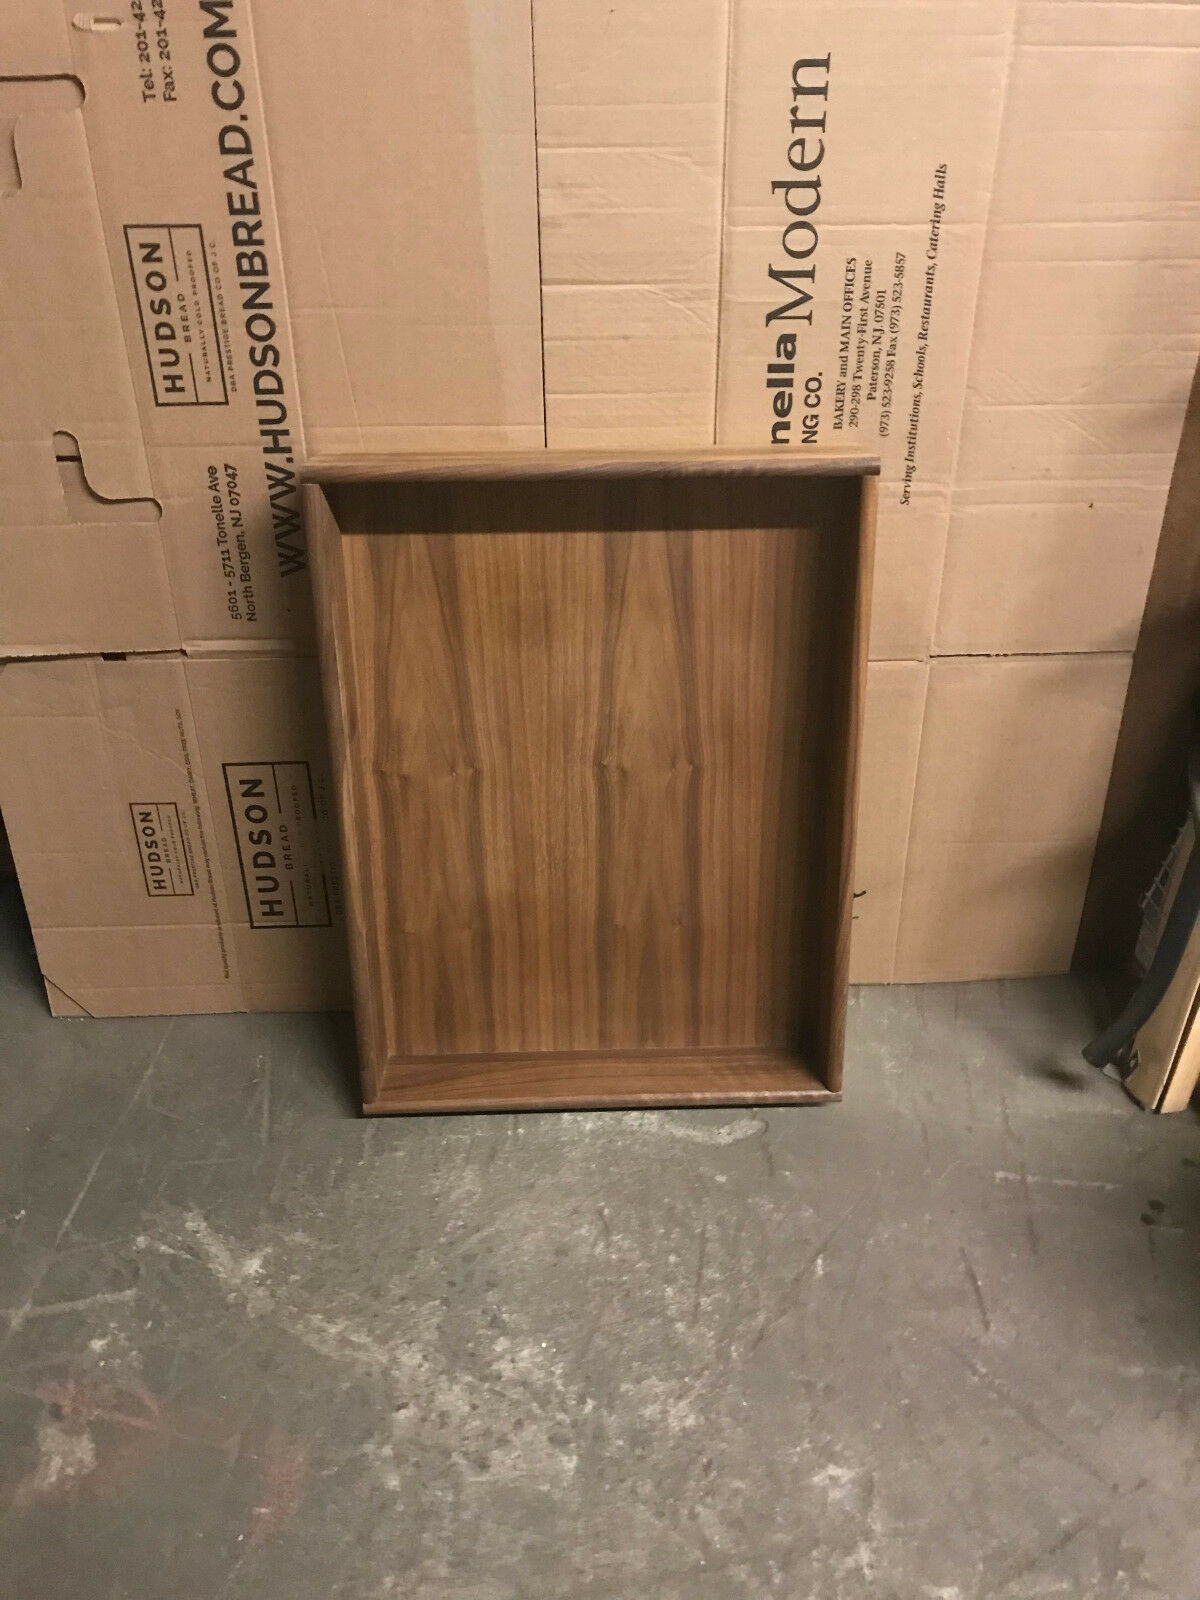 1 Solid Walnut Pull Out Drawer / Cabinet 27" X 20.5" X 4.5" Or 21" X 21" X 9.5"